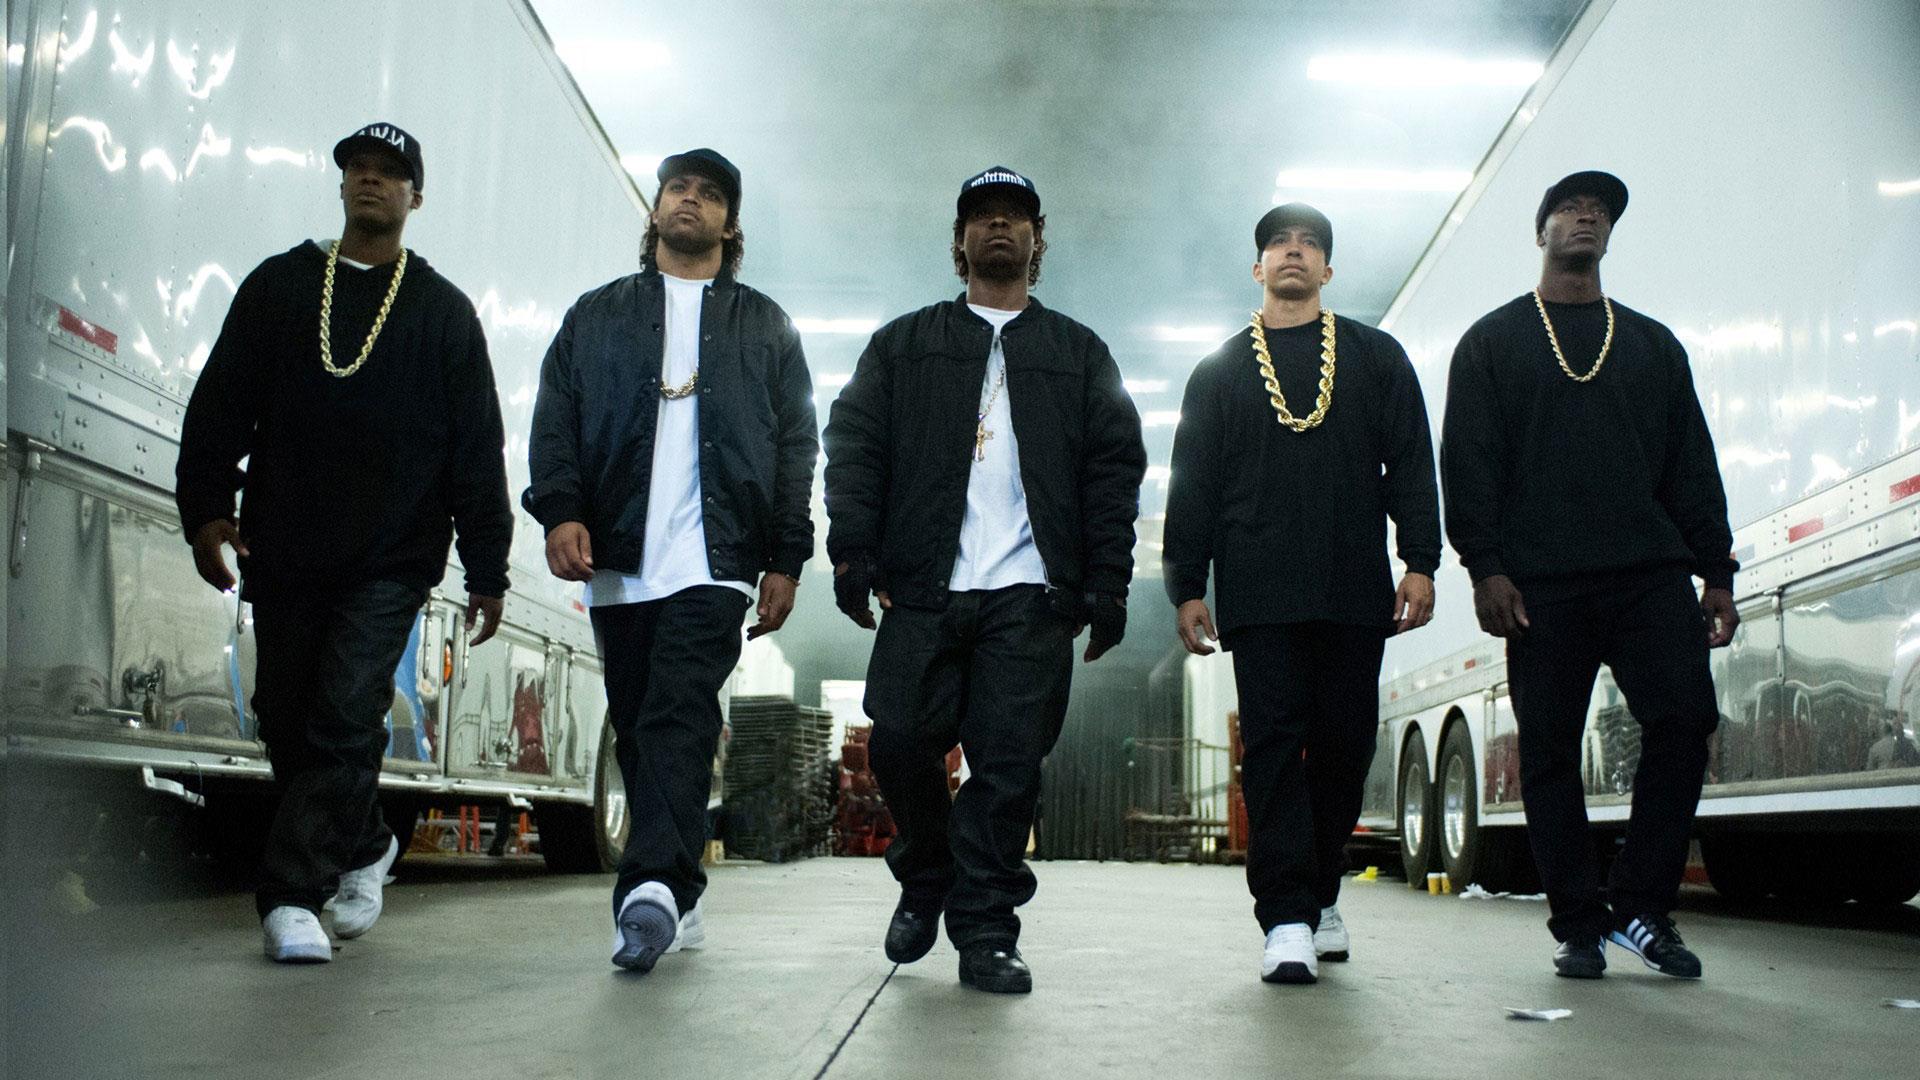 Review: “Straight Outta Compton” maintains grit and honesty in telling the story of N.W.A.